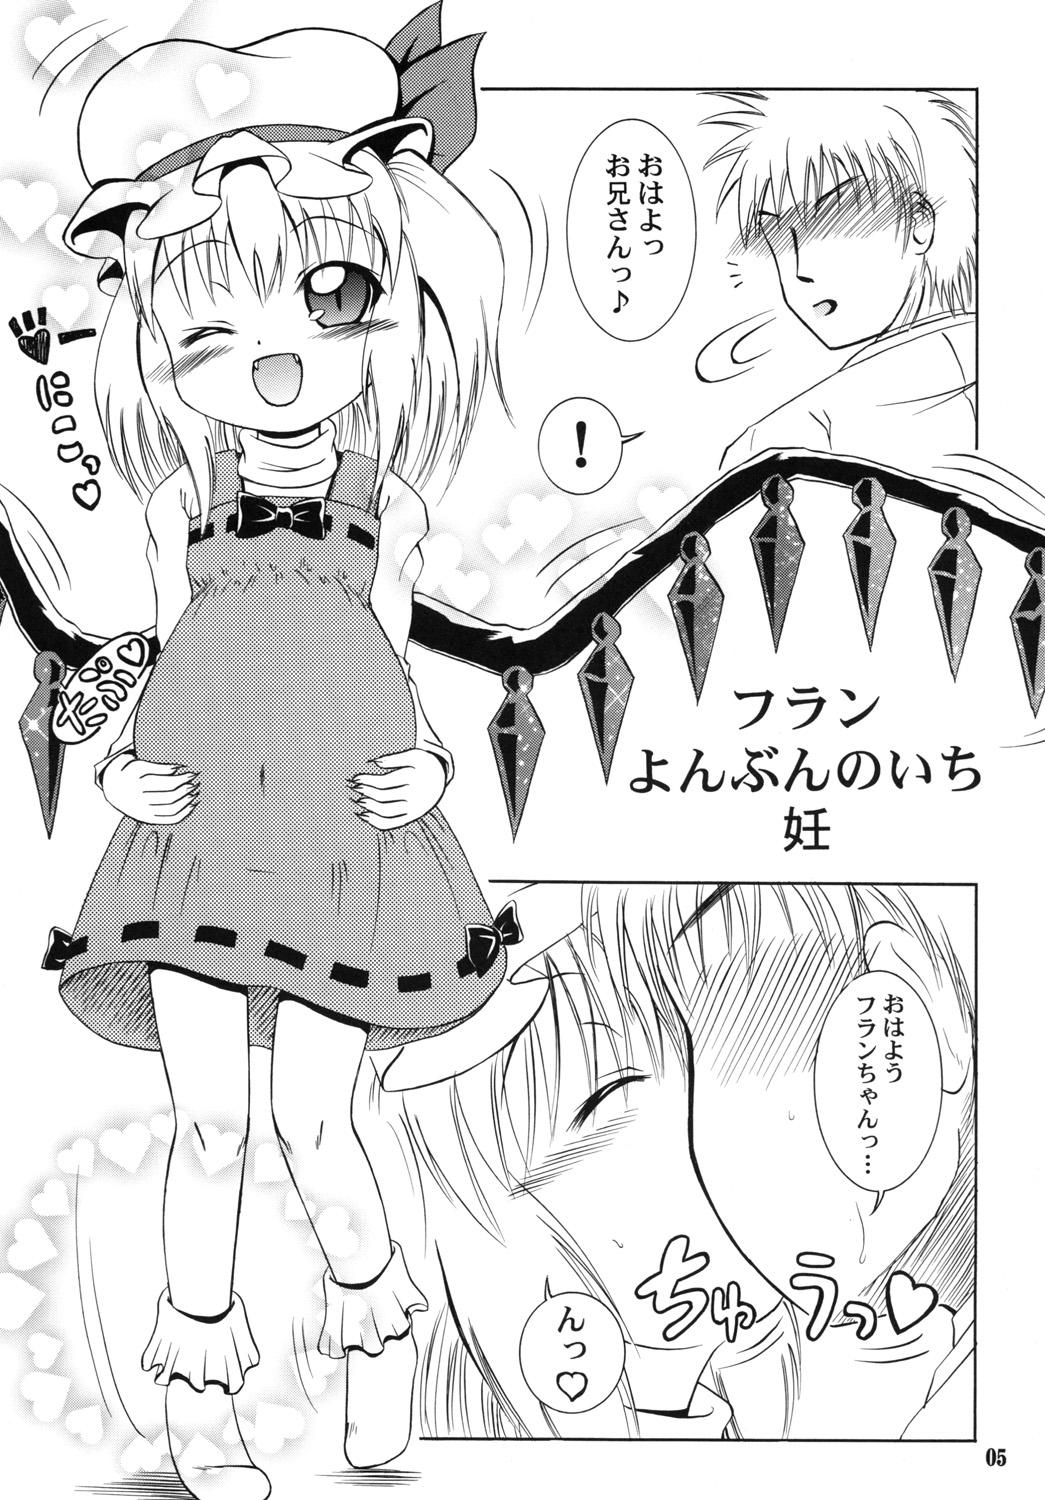 Pigtails Flan Yonbun no Ichi 2 - Touhou project Pounded - Page 4